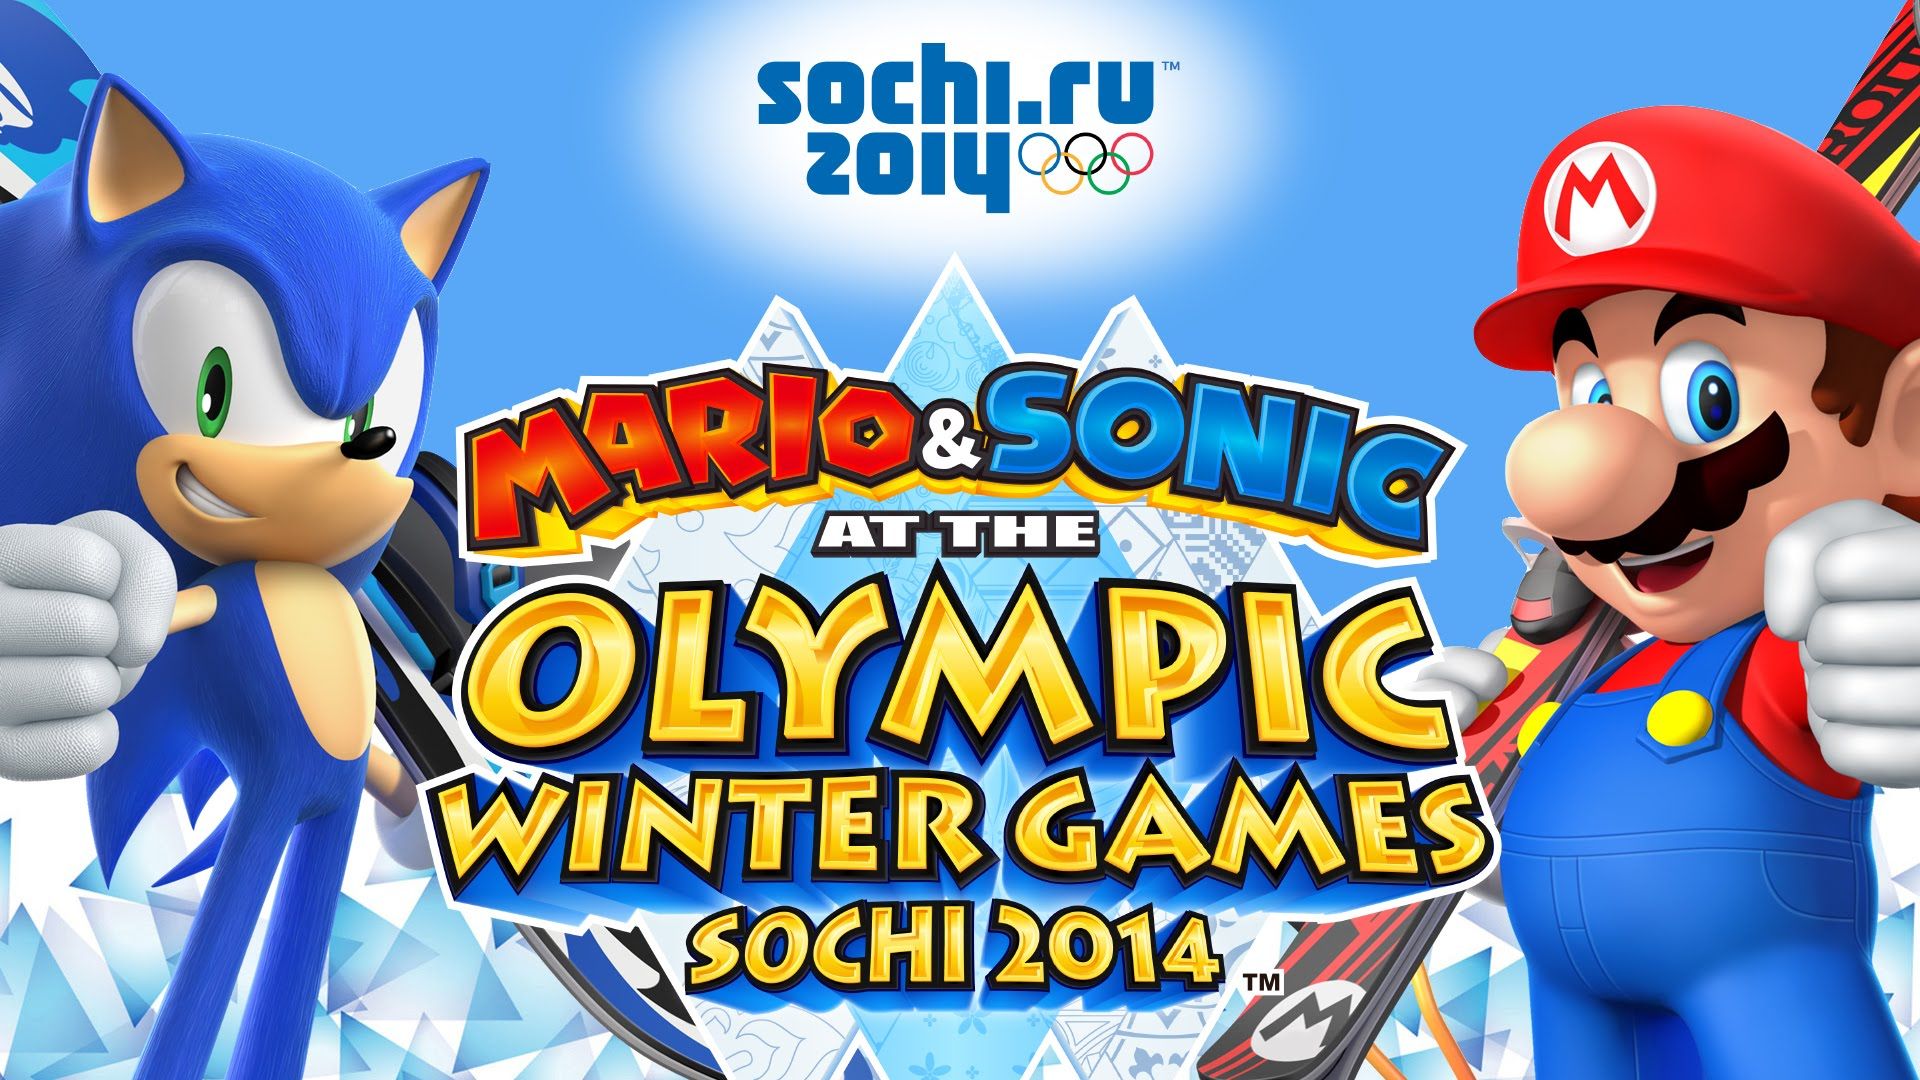 Most viewed Mario & Sonic At The Olympic Winter Games wallpaper